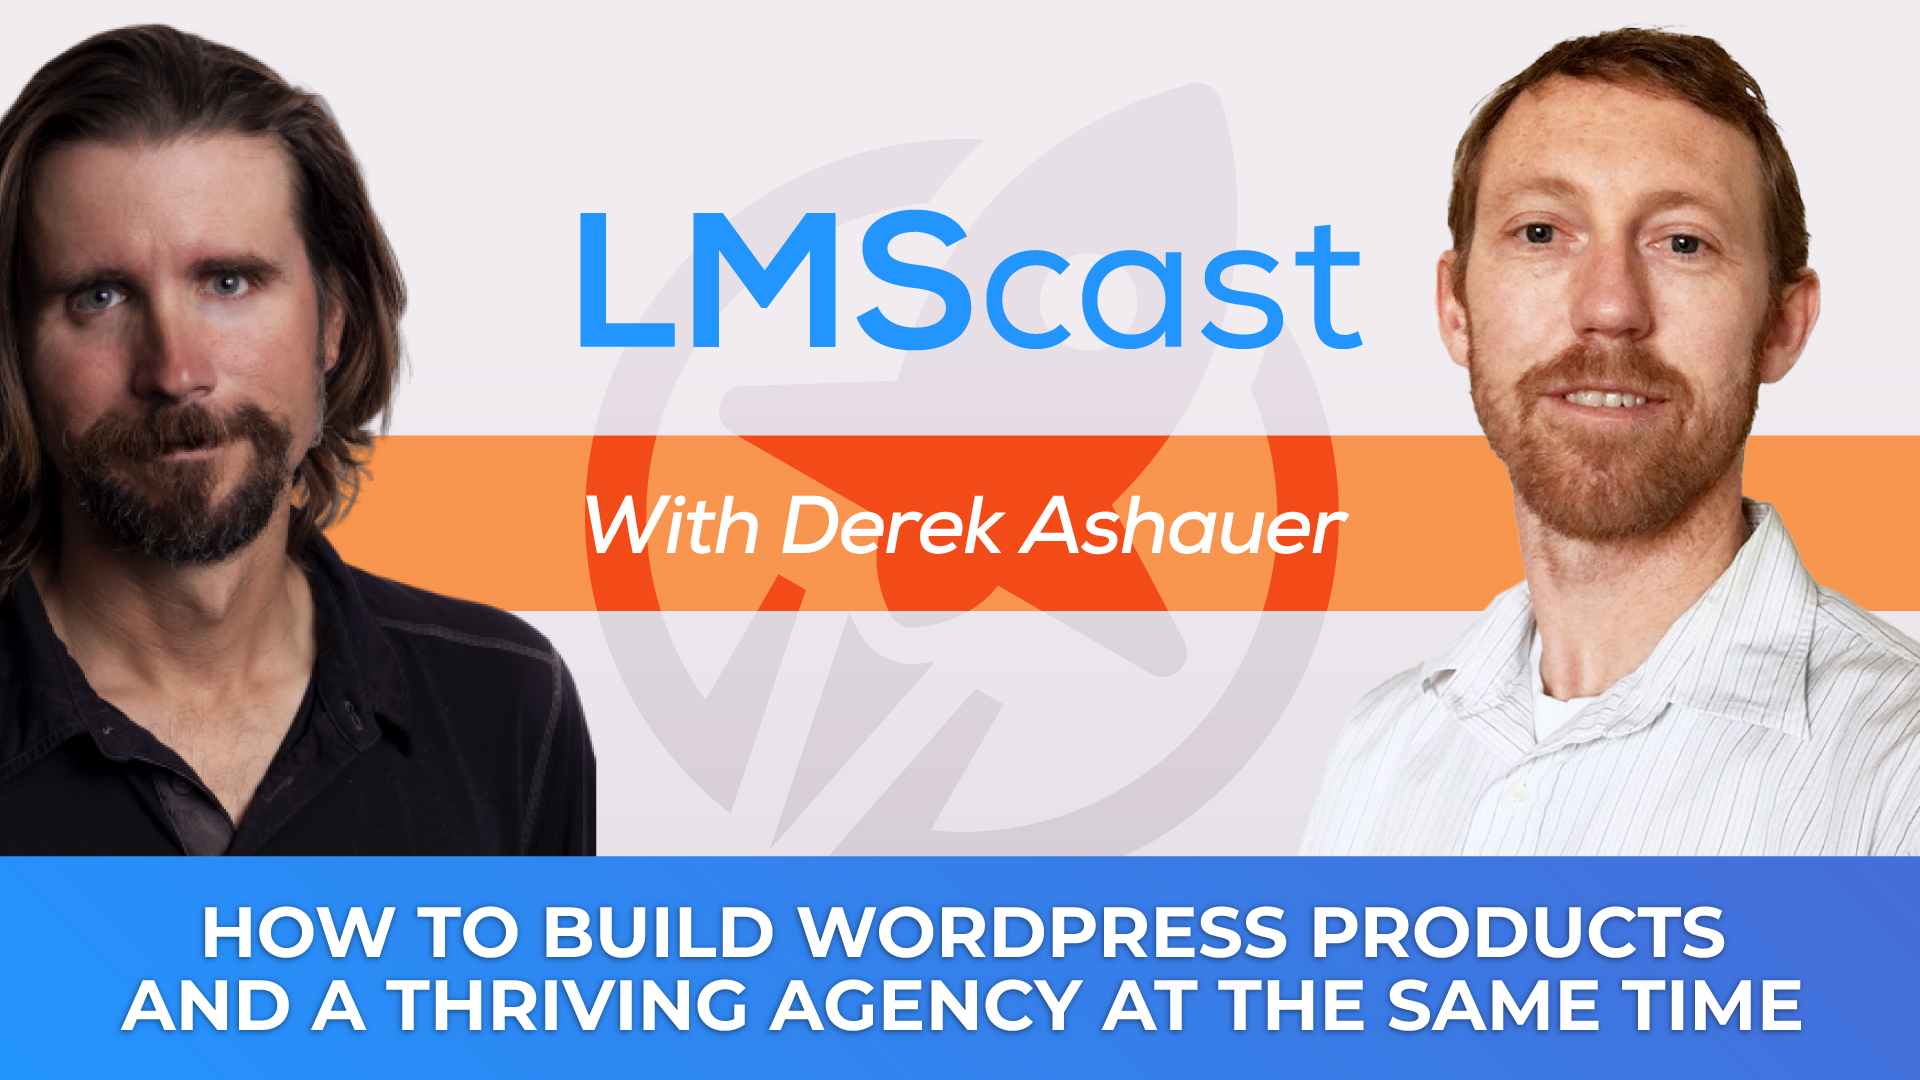 How to Build WordPress Products and a Thriving Agency at the Same Time with Derek Ashauer